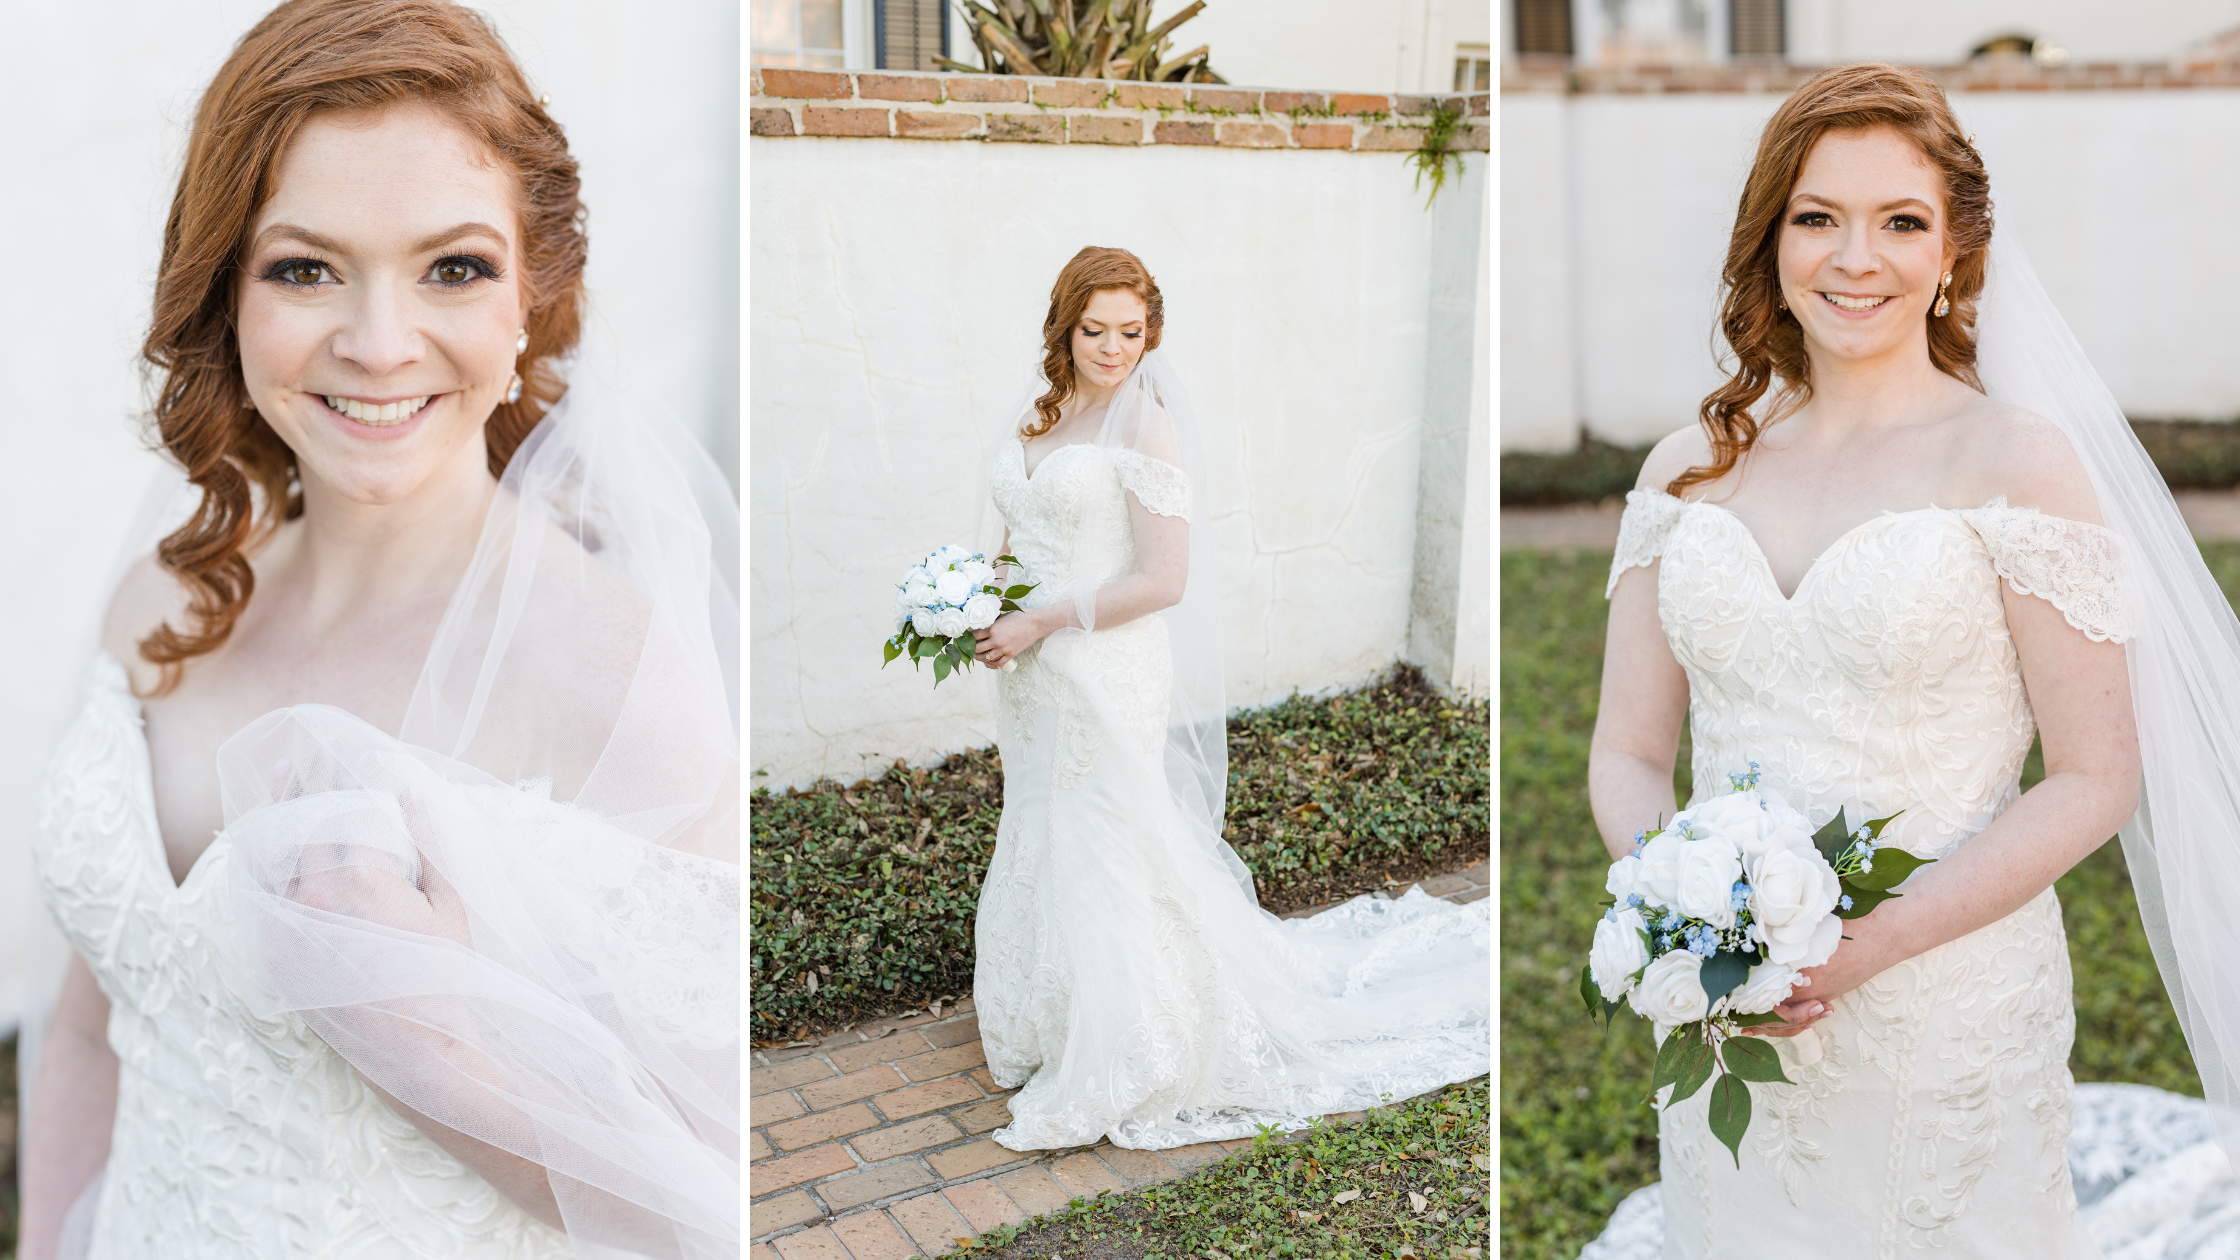 Conde Charlotte Museum Bridal Portrait Session Photographed by Kristen Marcus Photography in Downtown Mobile Alabama